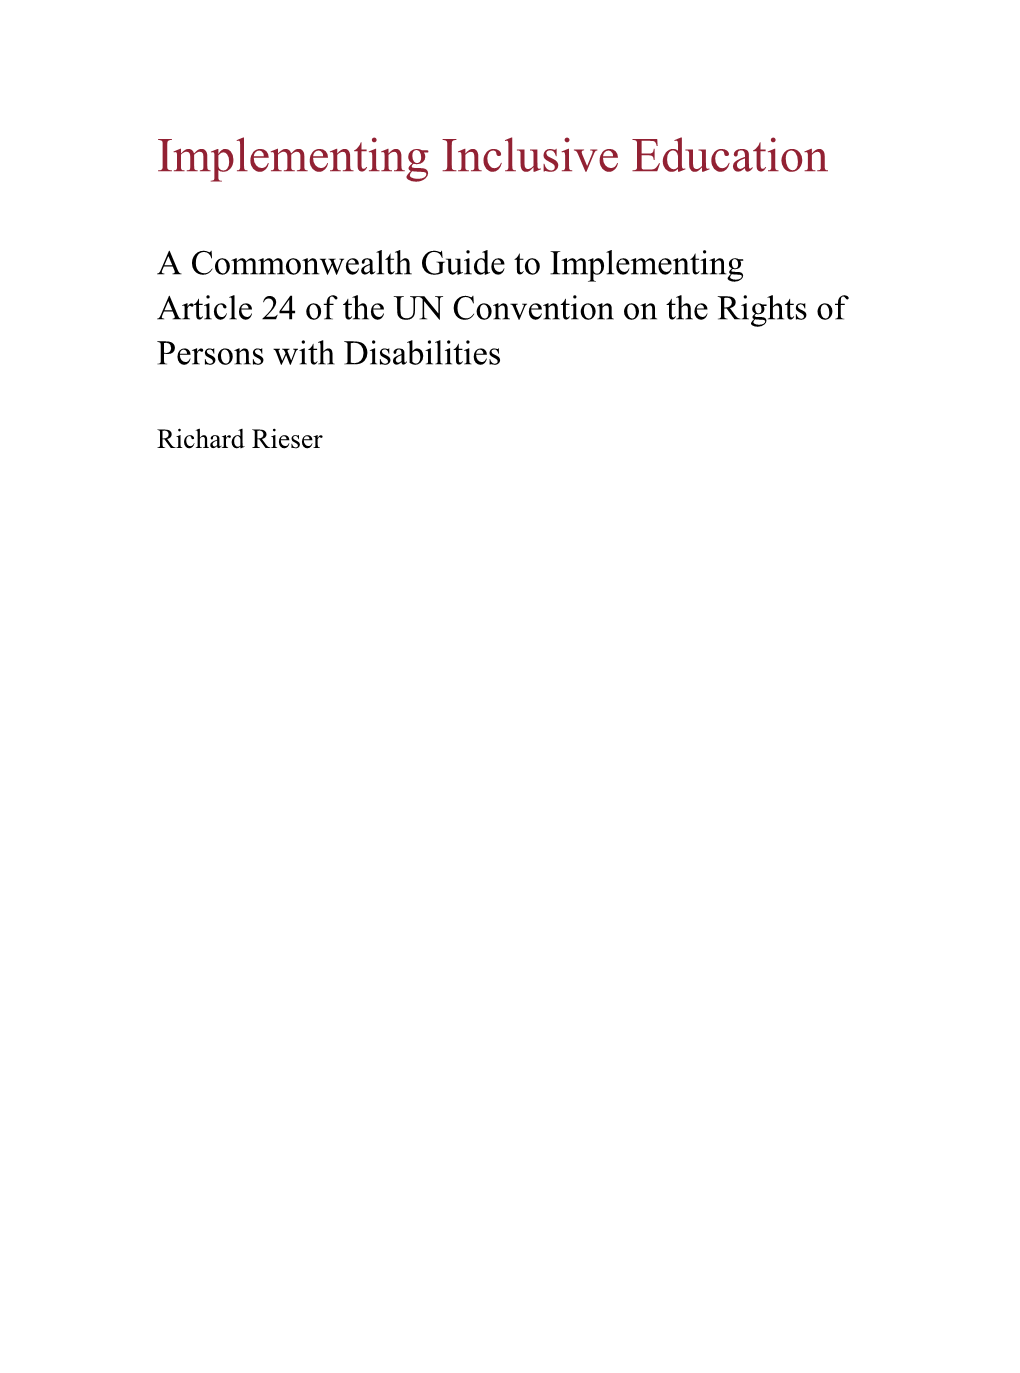 Article 24 of the UN Convention on the Rights of Persons with Disabilities